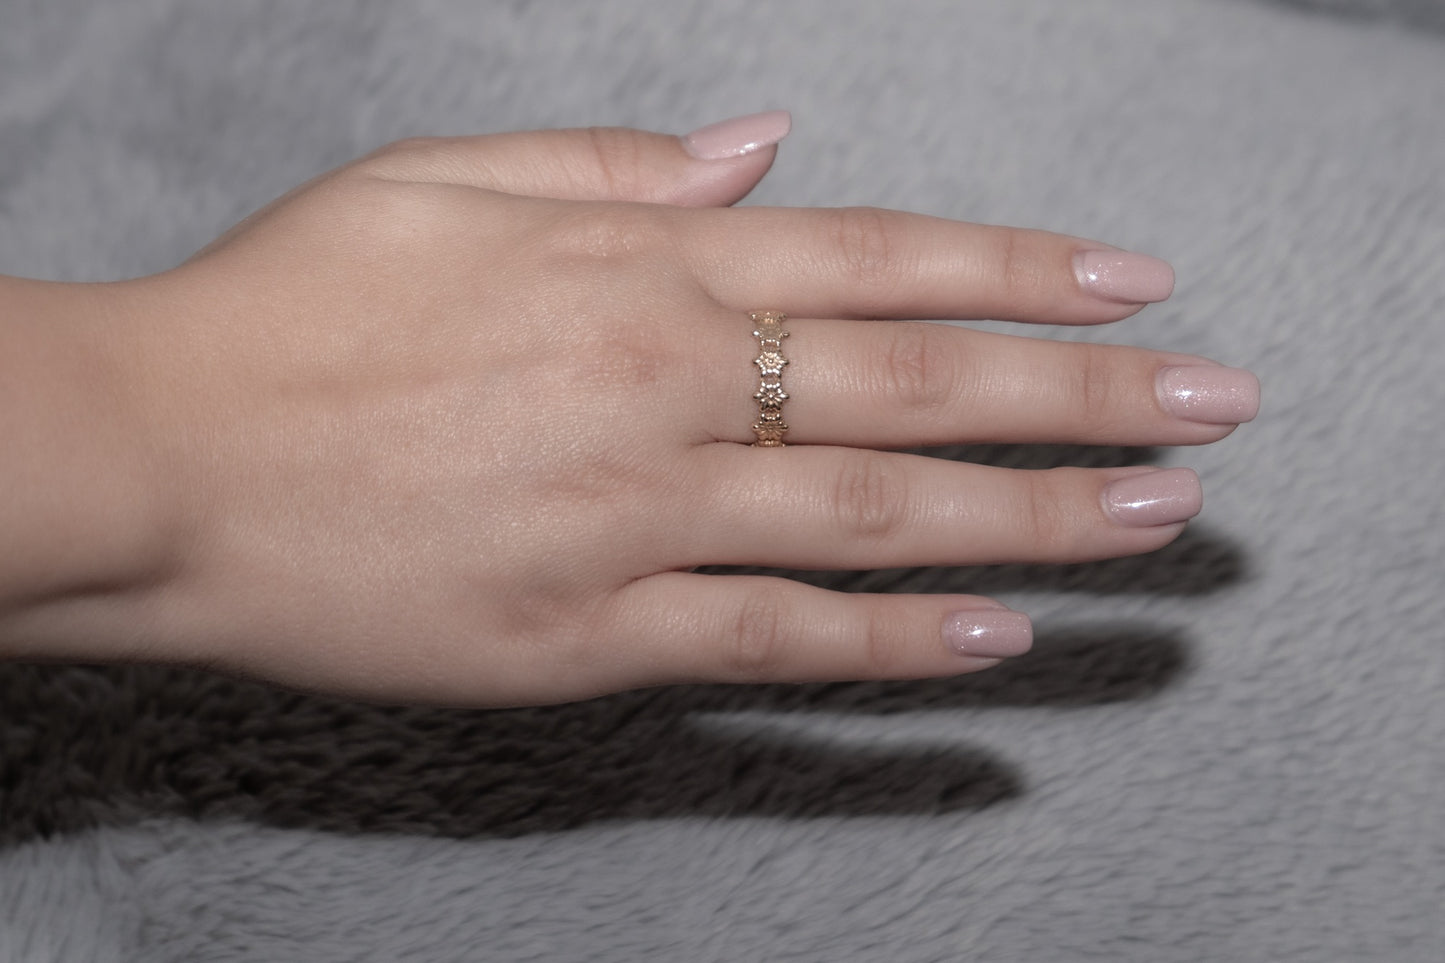 Simplicity-14k gold ring